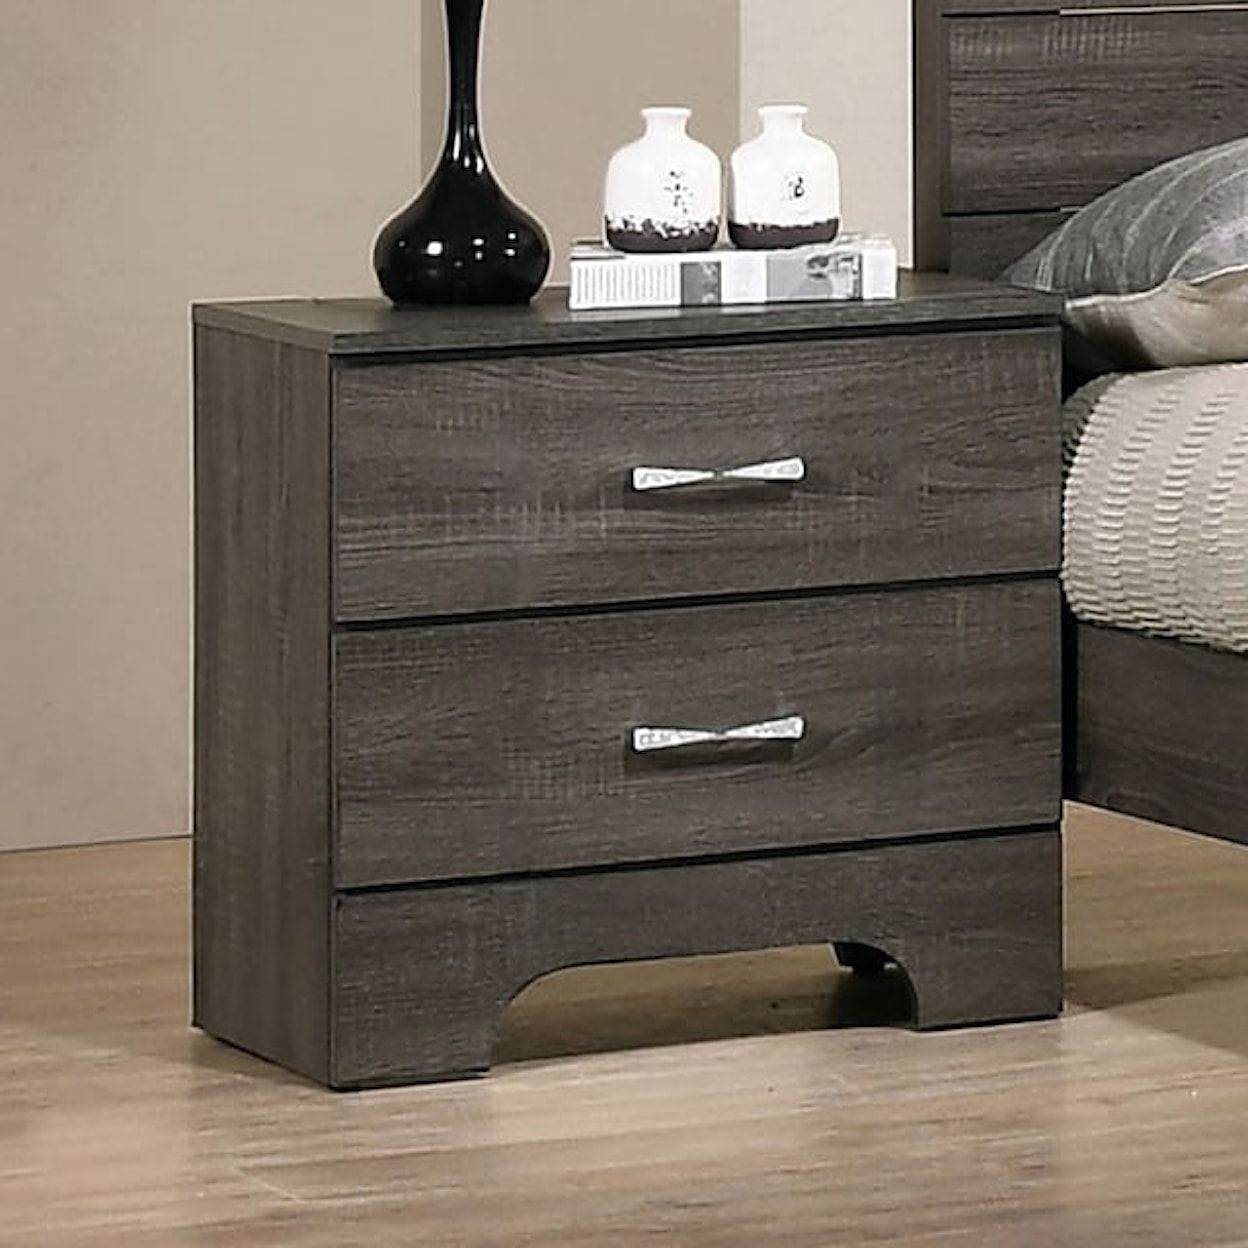 Furniture of America Richterswil 2-Drawer Nightstand